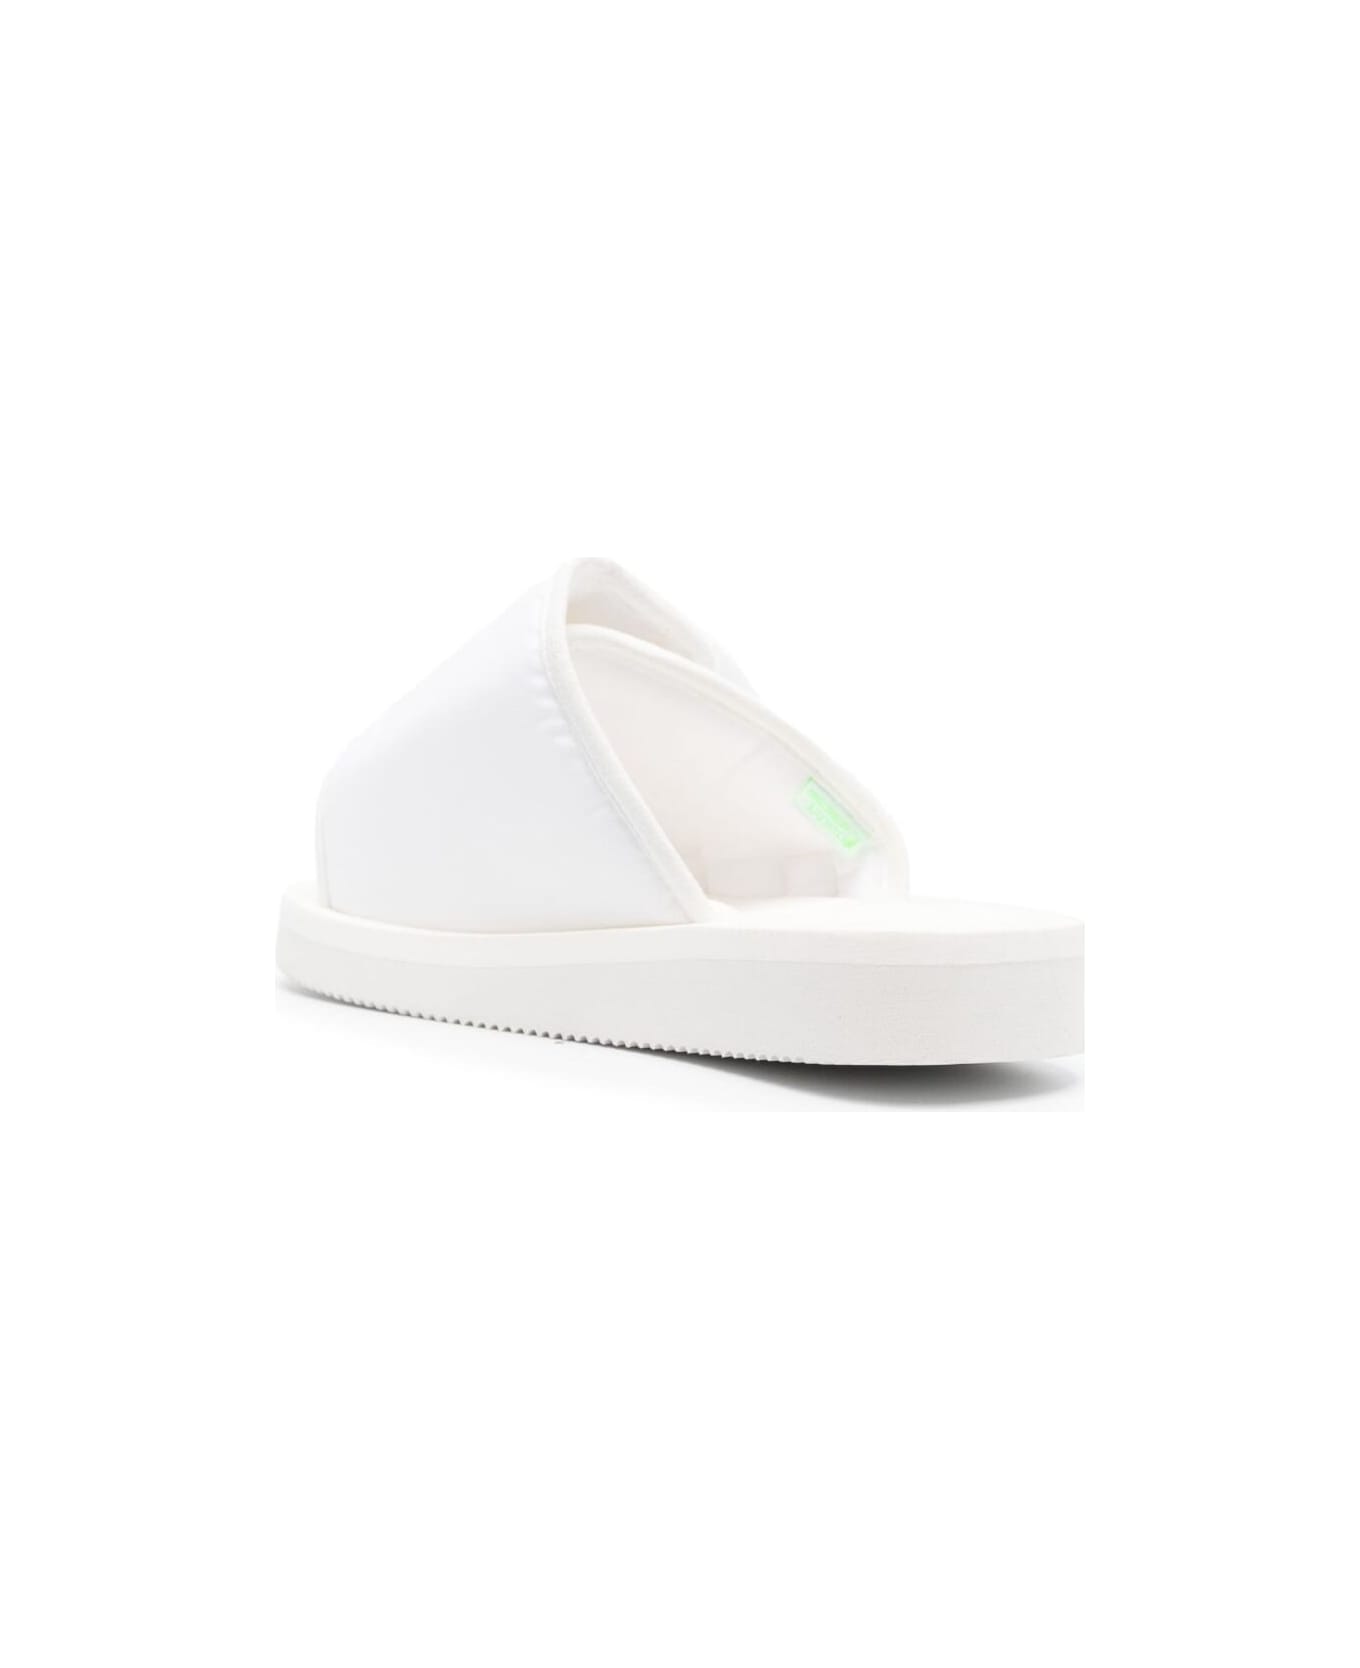 SUICOKE 'kaw-cab' White Sandals With Velcro Fastening In Nylon Man Suicoke - White その他各種シューズ